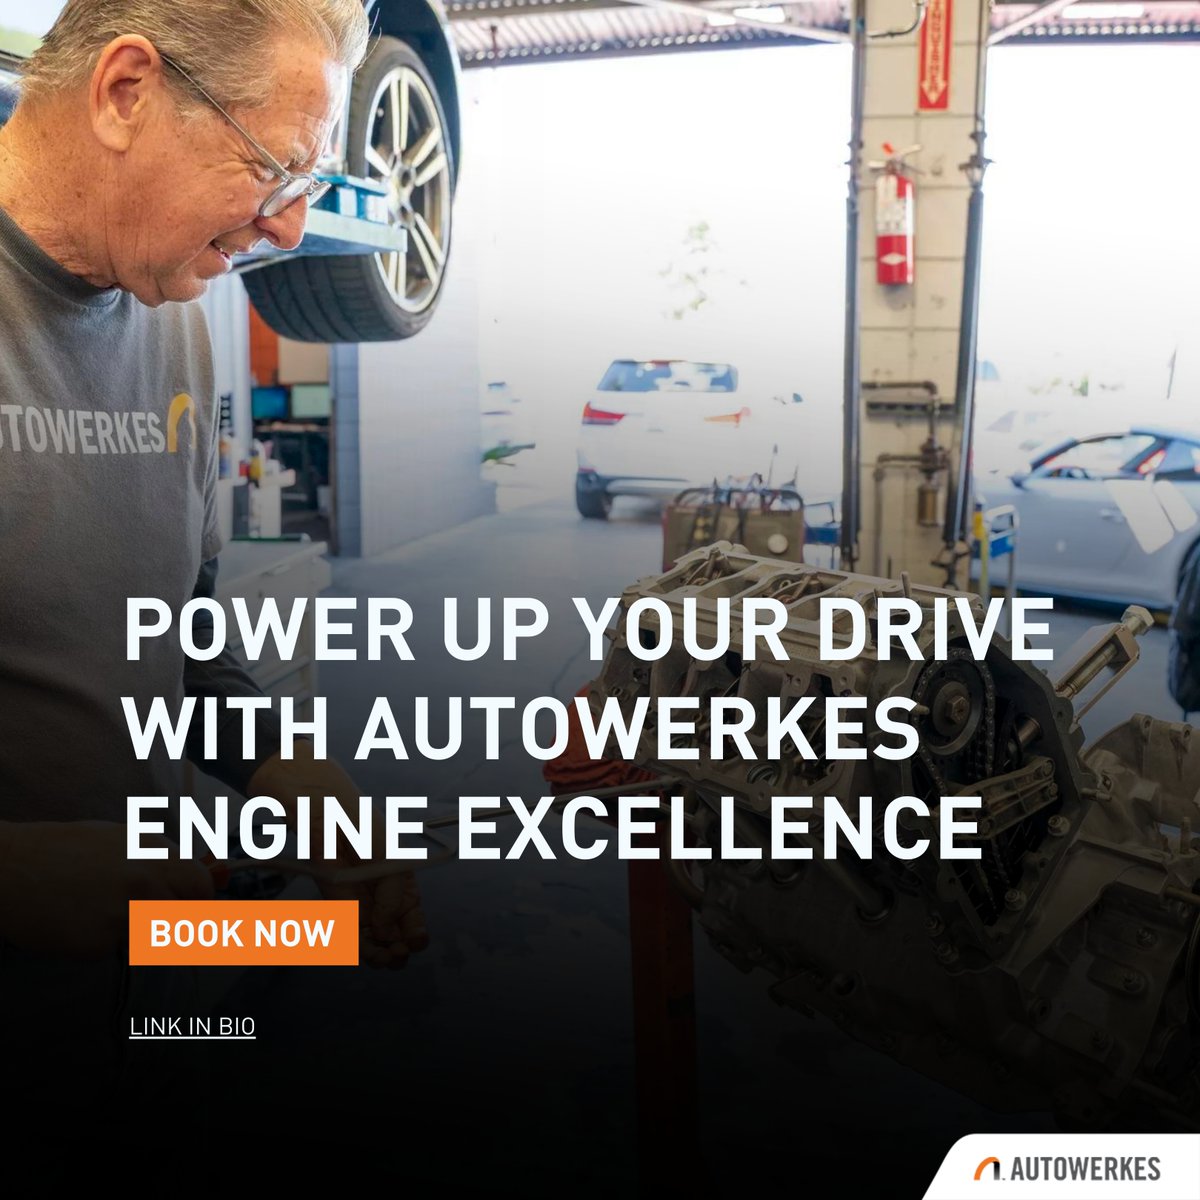 At Autowerkes, we're dedicated to ensuring your engine performs at its best. 

Book your engine service today at autowerkes.com

#EngineServices #CoolingSystemCare #BeltReplacement #RadiatorRepair #DriveWithConfidence #EngineCare #AutowerkesExcellence